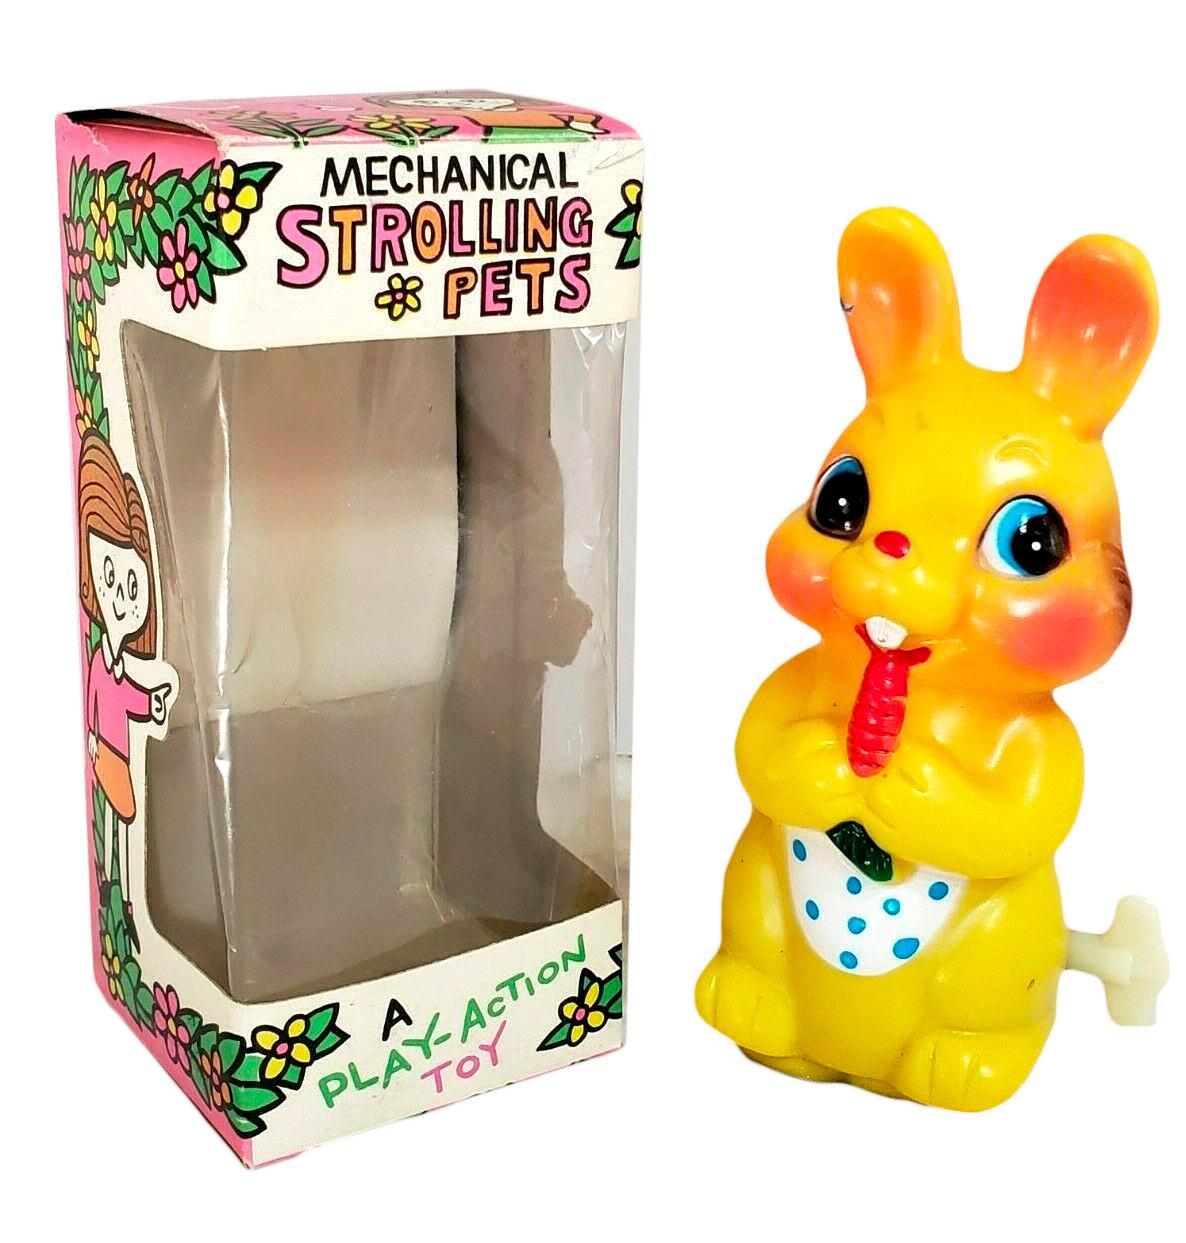 Vintage 1950s Play Action Toy Bunny Easter Unlimited Windup in Original Box Made in Japan